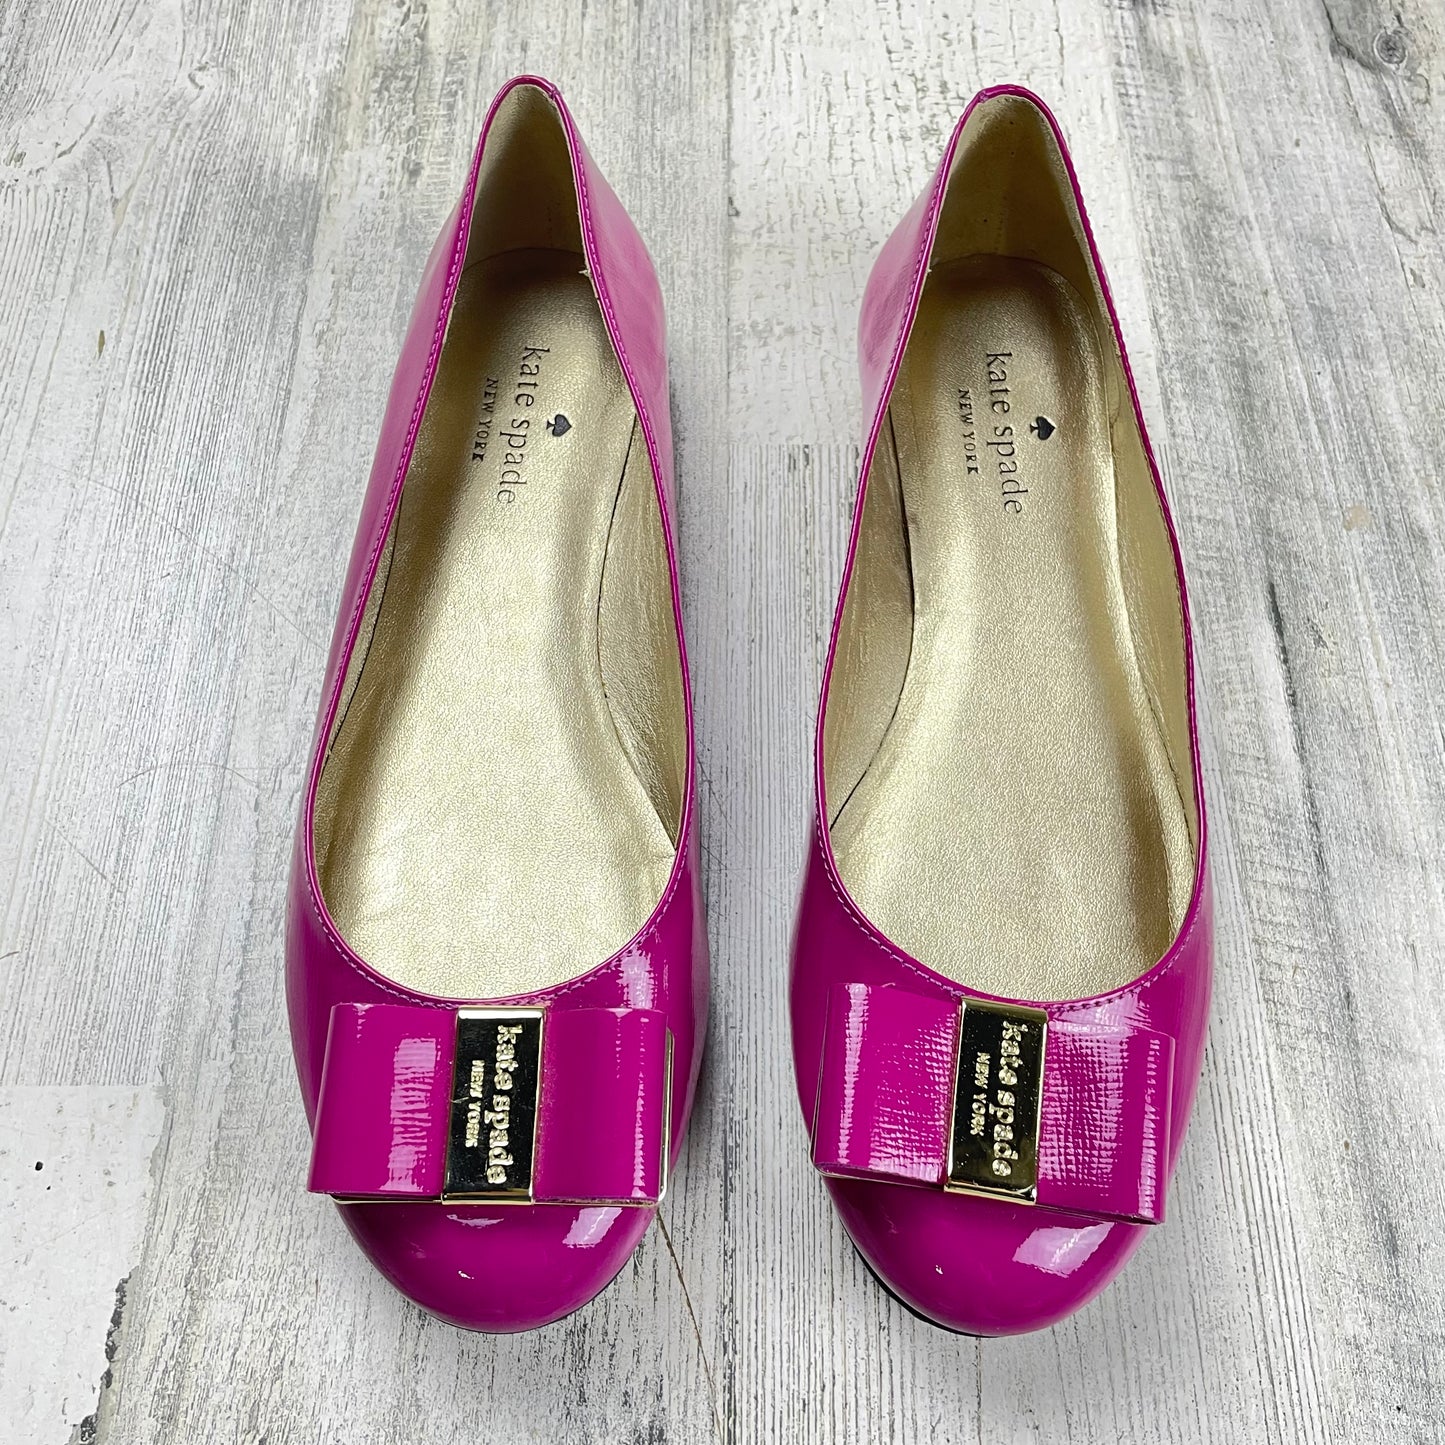 Shoes Flats Ballet By Kate Spade  Size: 6